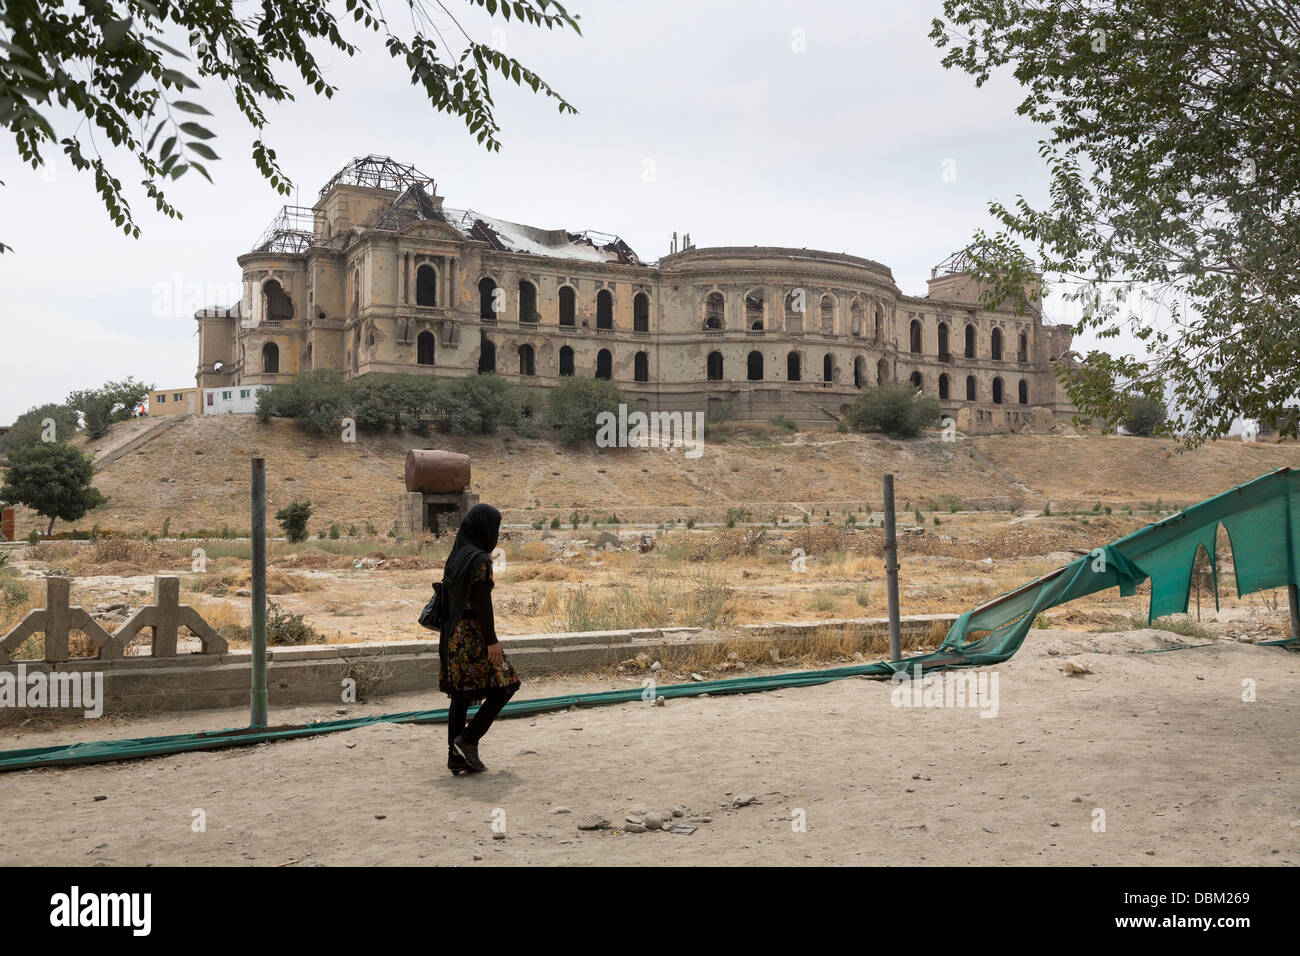 Afghan woman walking by the ruins of Darul Aman Palace, Kabul, Afghanistan Stock Photo